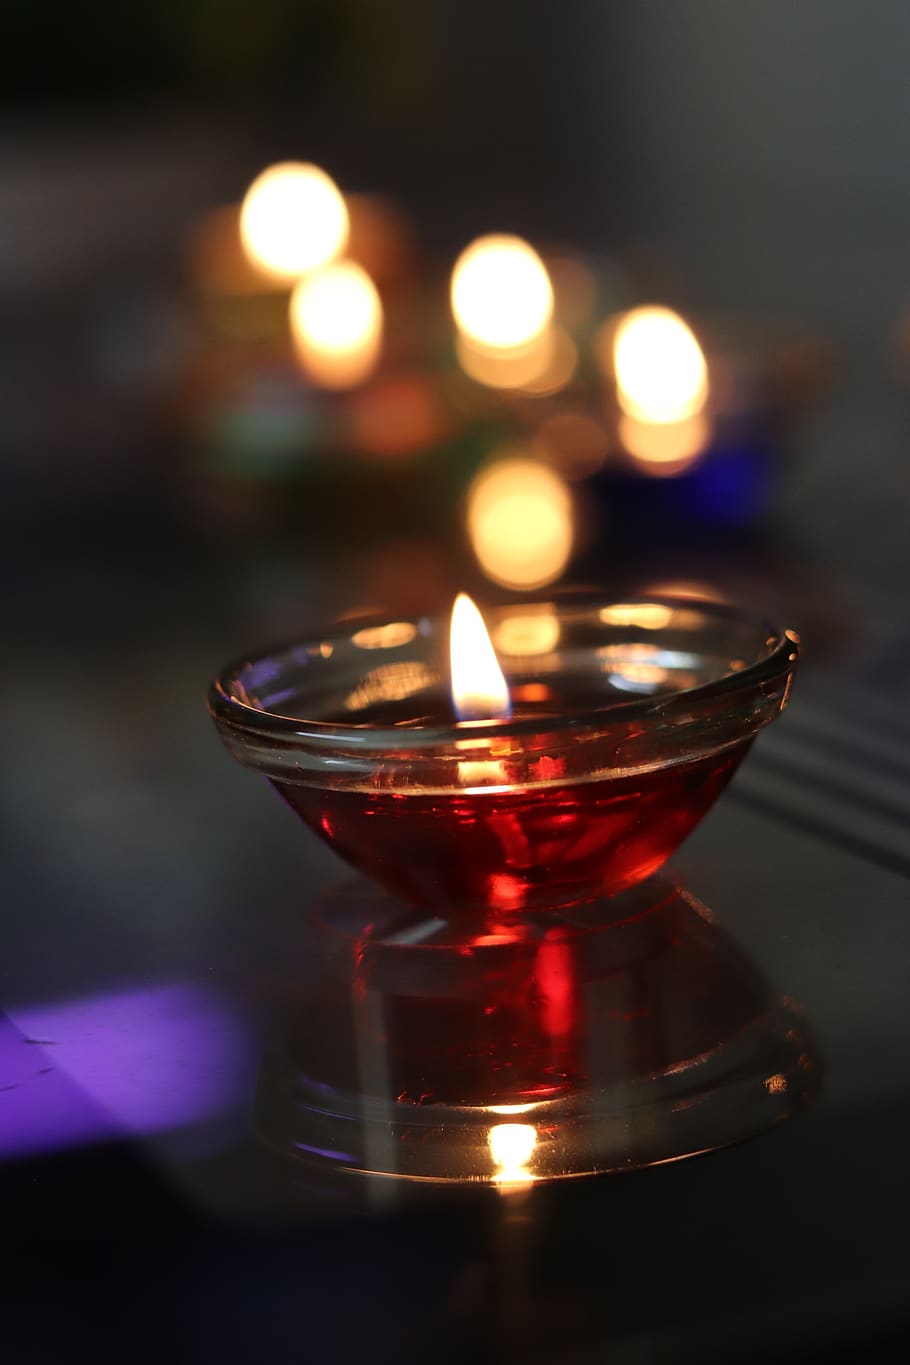 diwali, candle, candlelight, candle design, flame, fire, burning